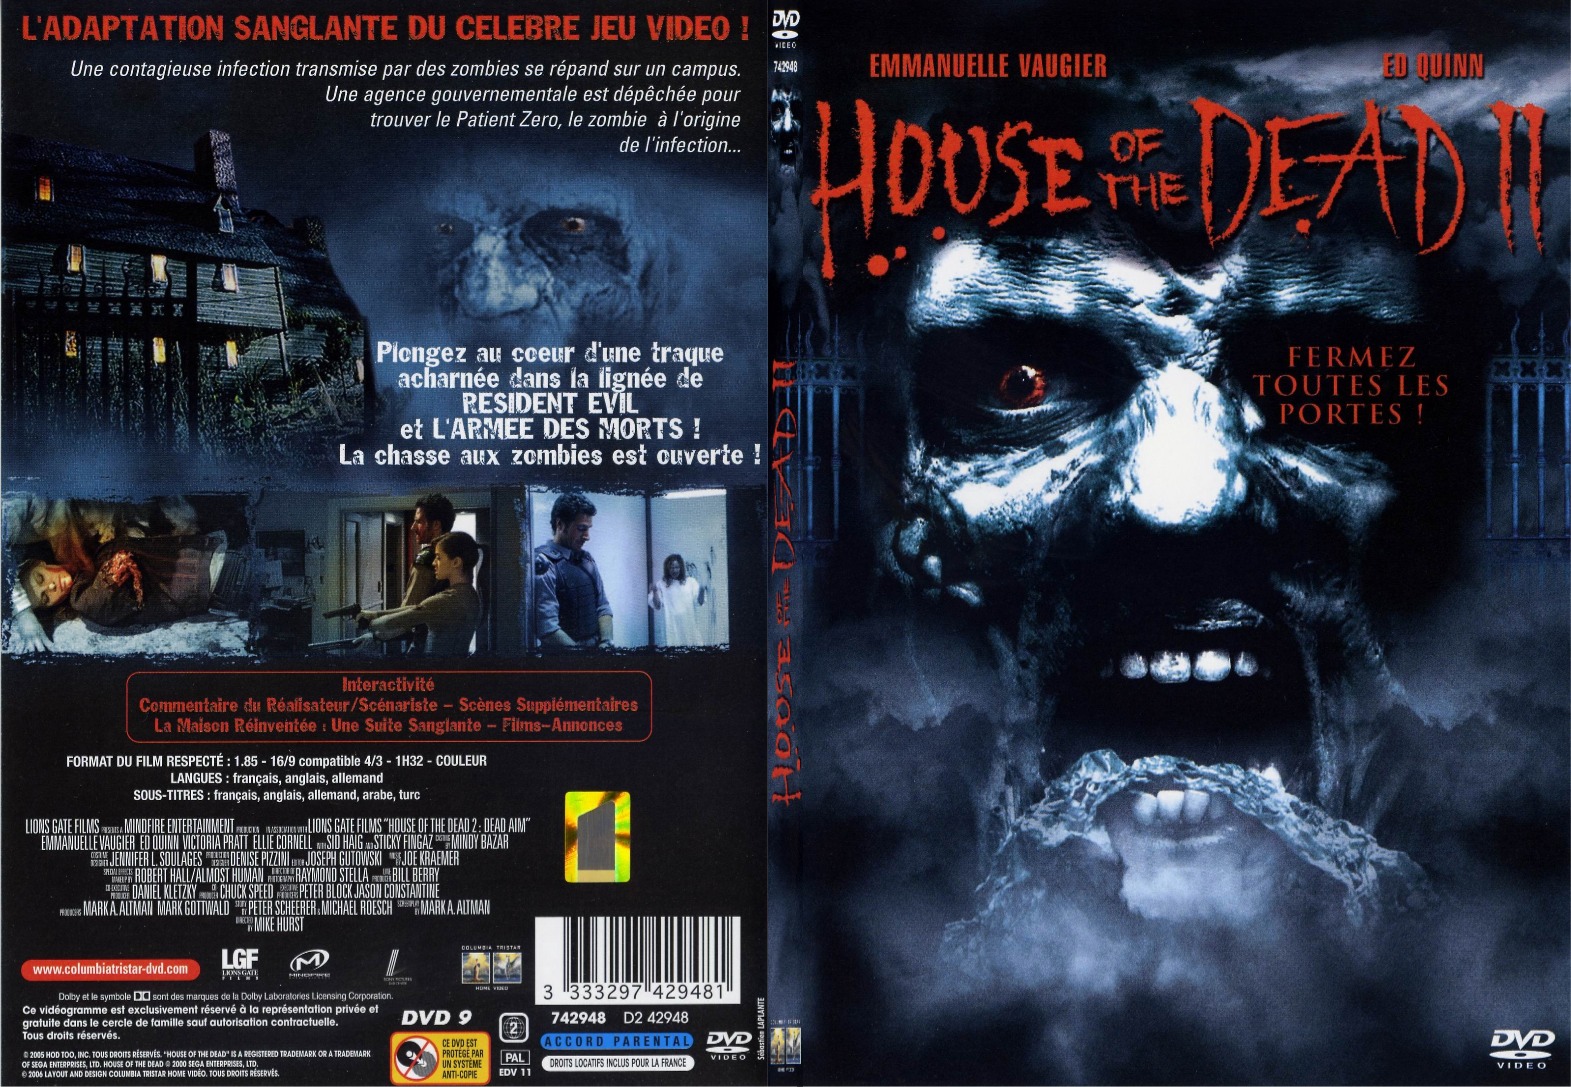 Jaquette DVD House of the Dead 2 - SLIM